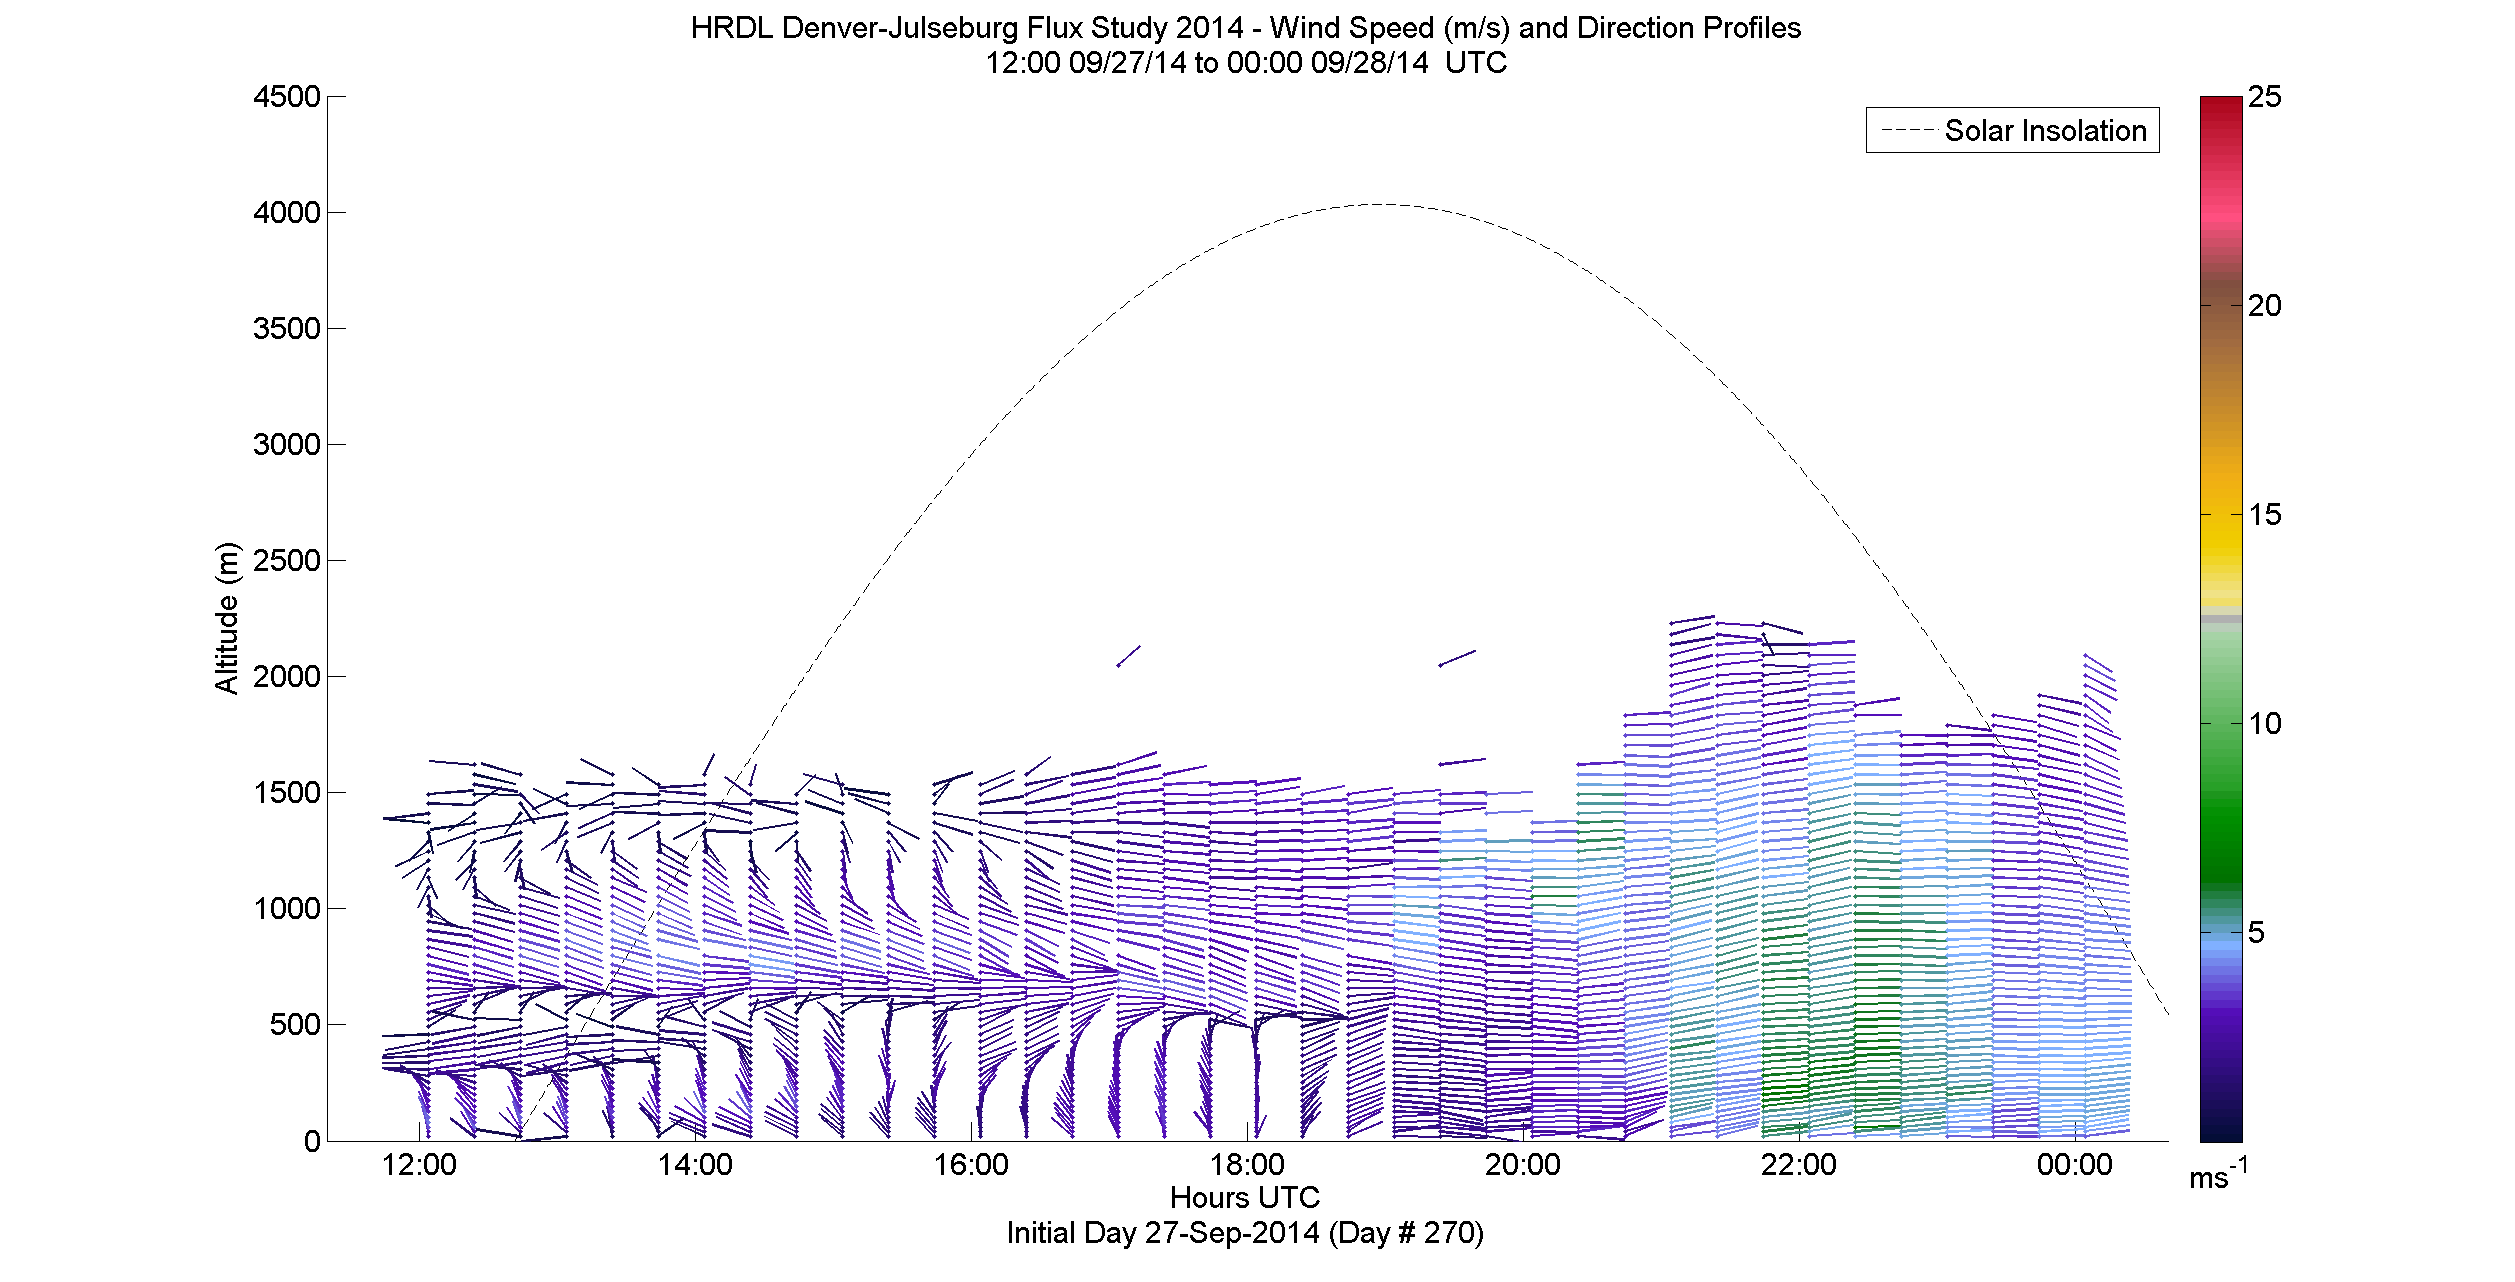 HRDL speed and direction profile - September 27 pm